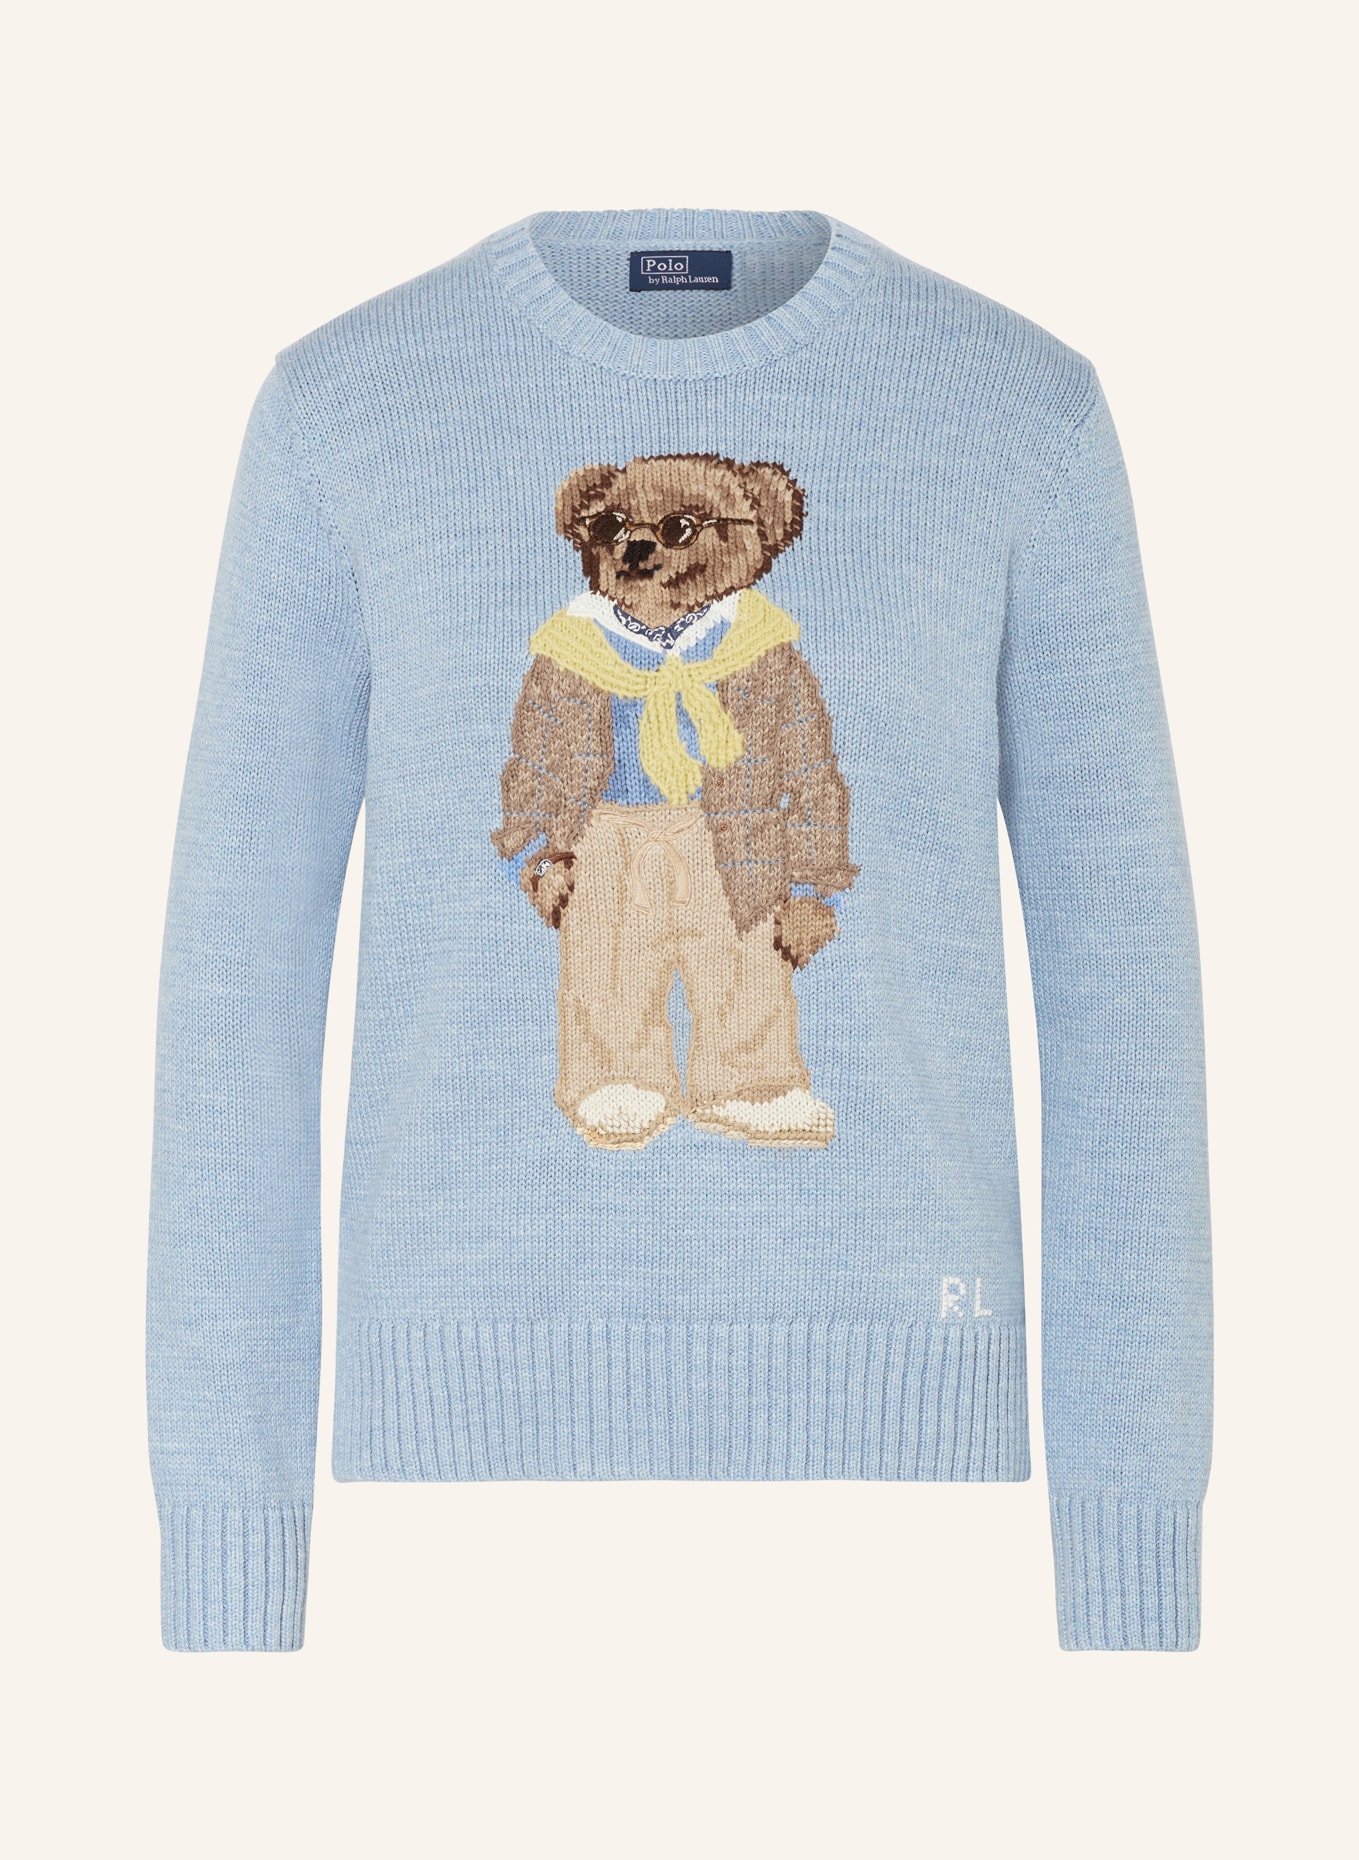 POLO RALPH LAUREN Sweater, Color: LIGHT BLUE/ BROWN/ YELLOW (Image 1)